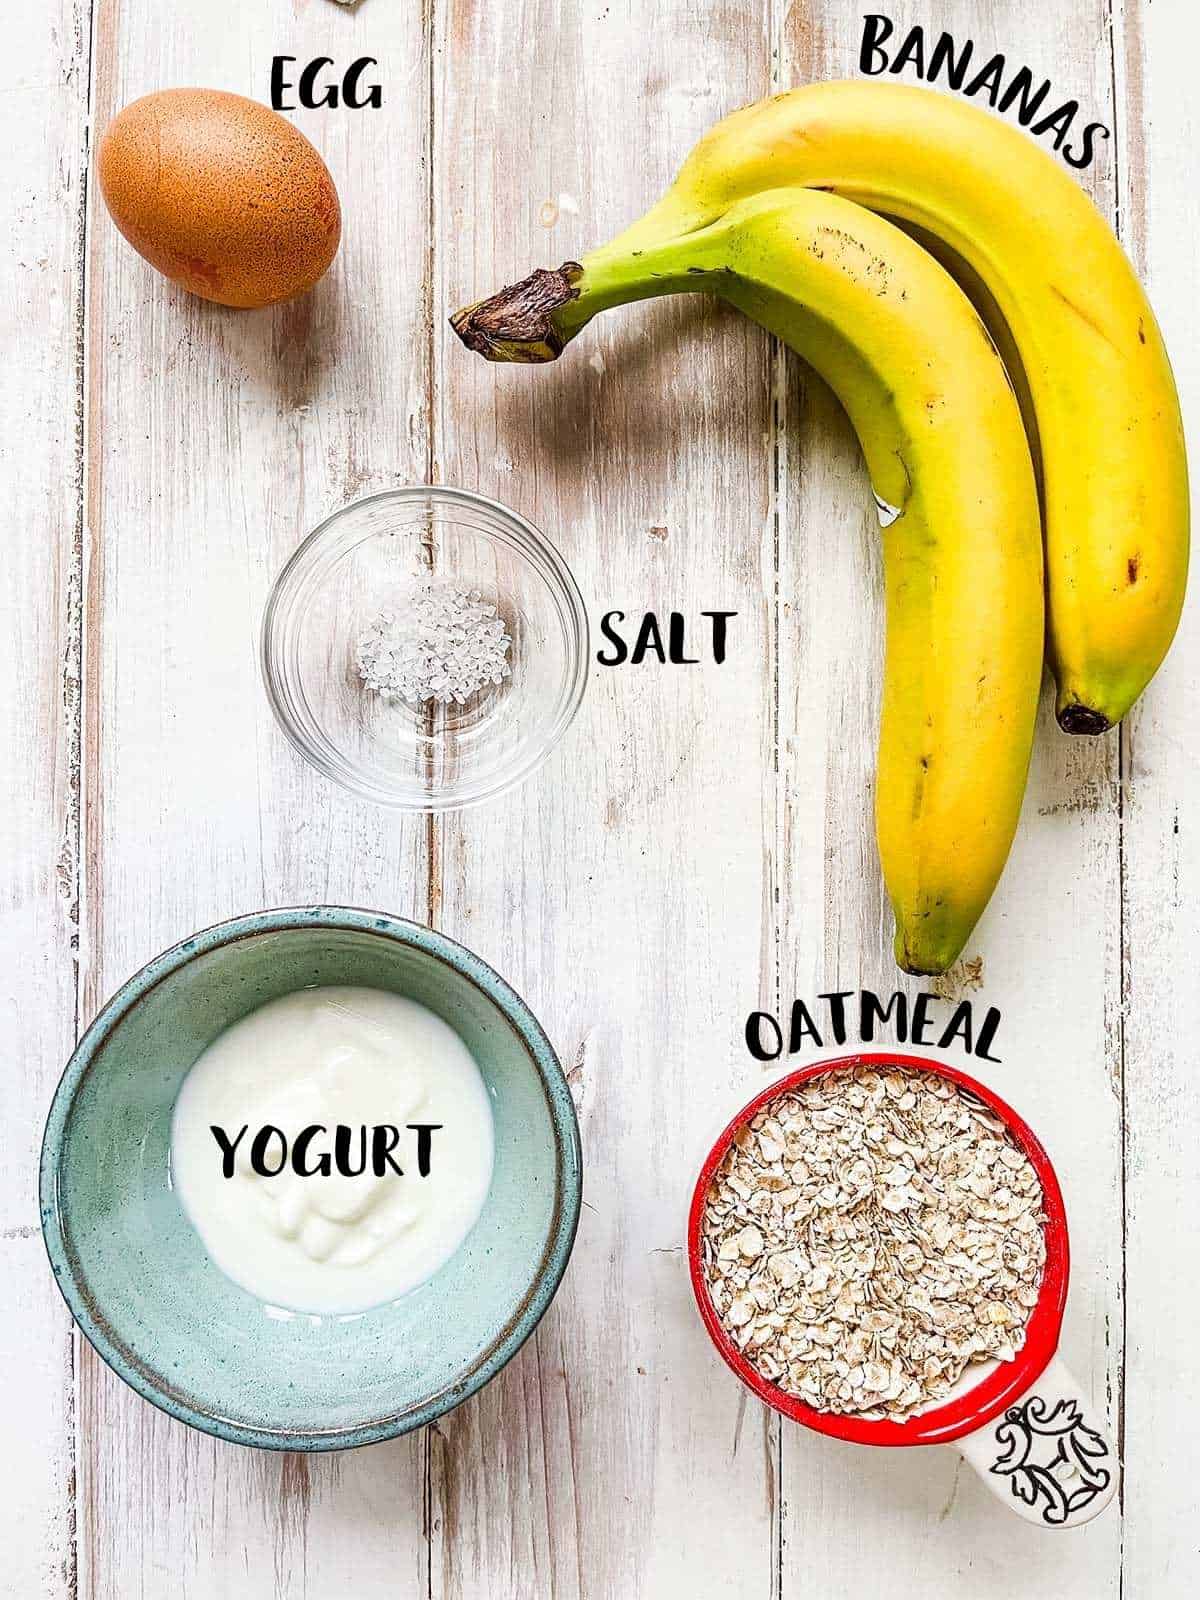 Ingredients to make banana pancakes laid out on a white table with labels.